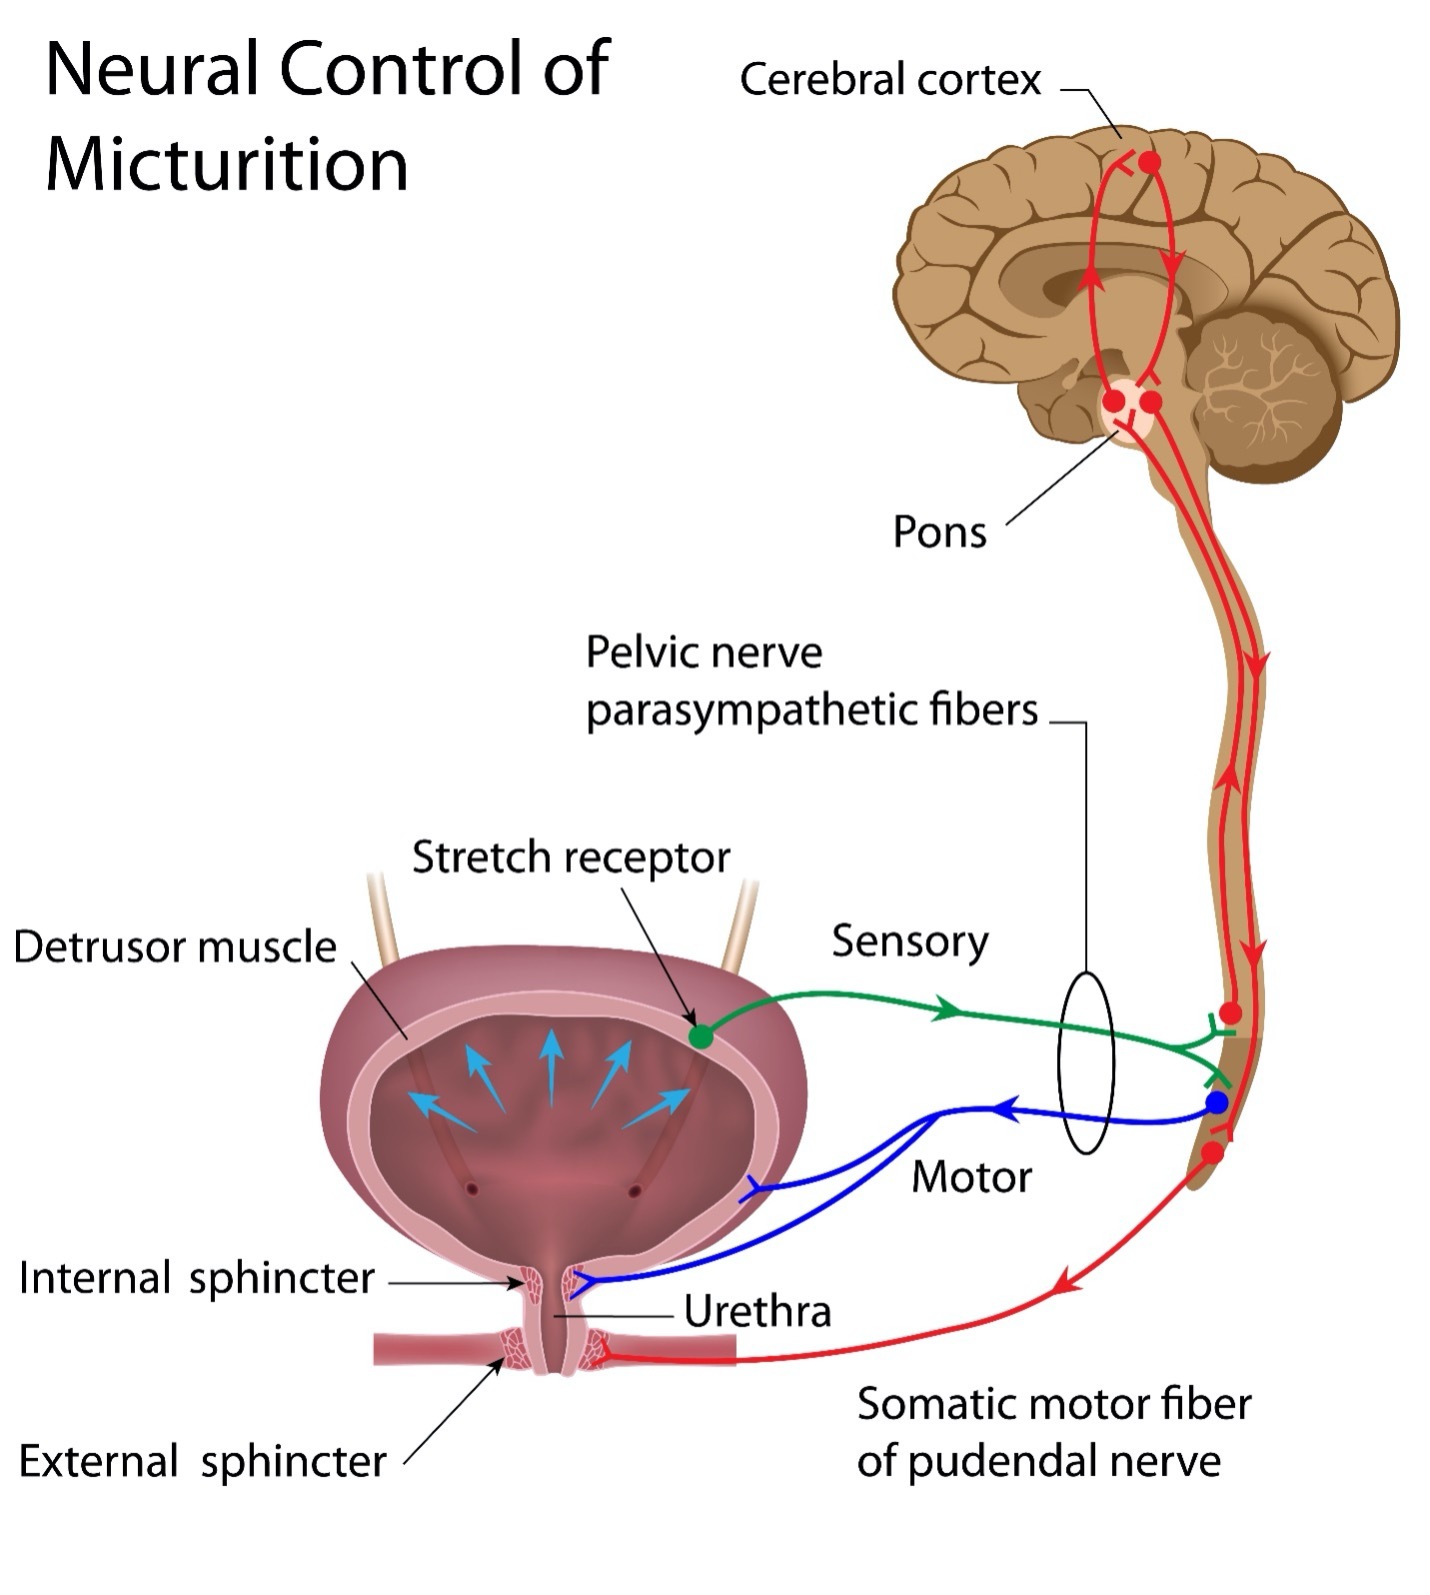 Neural Control of Micturition graphic